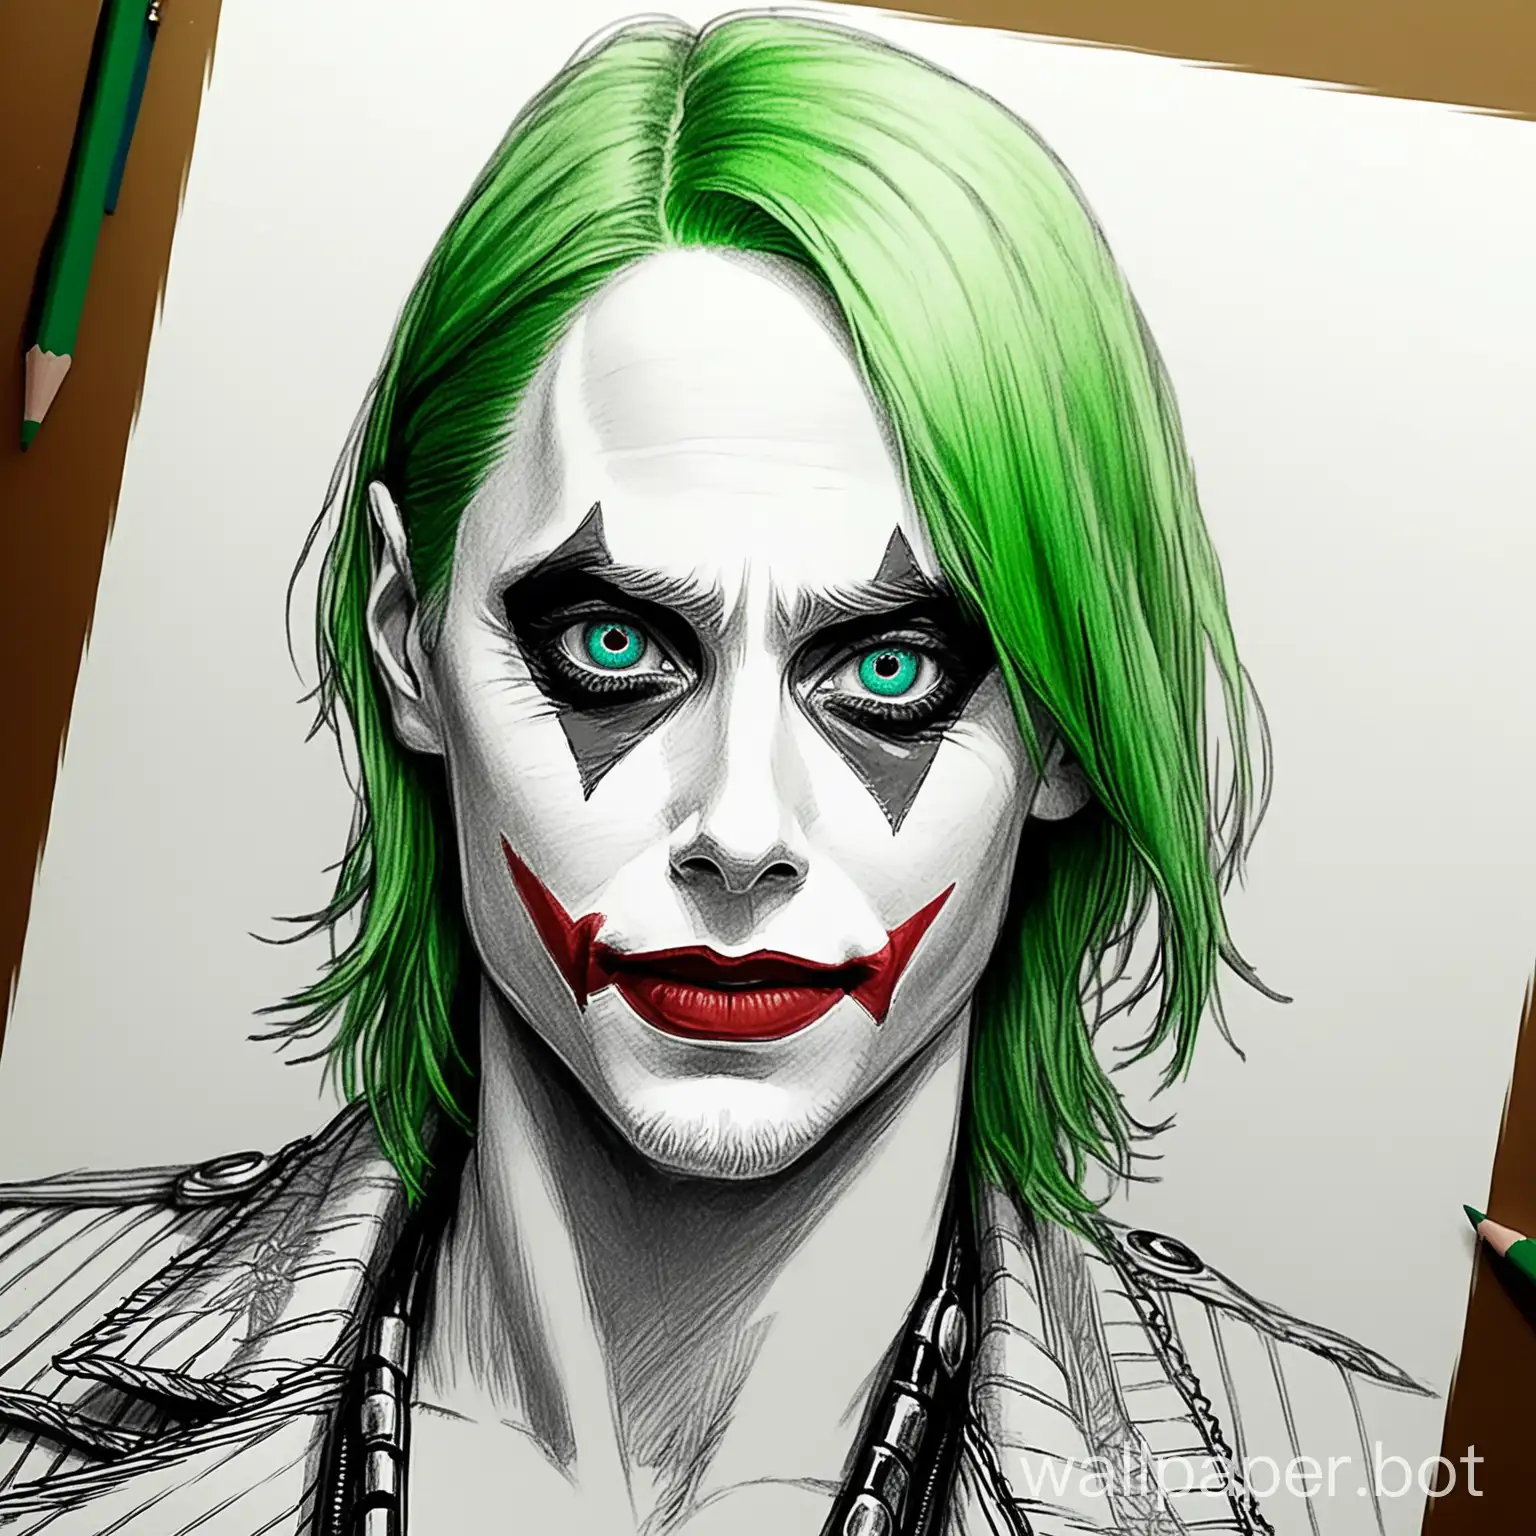 Jared-Leto-Joker-Portrait-Drawing-Comic-Book-Style-GreenHaired-Masterpiece